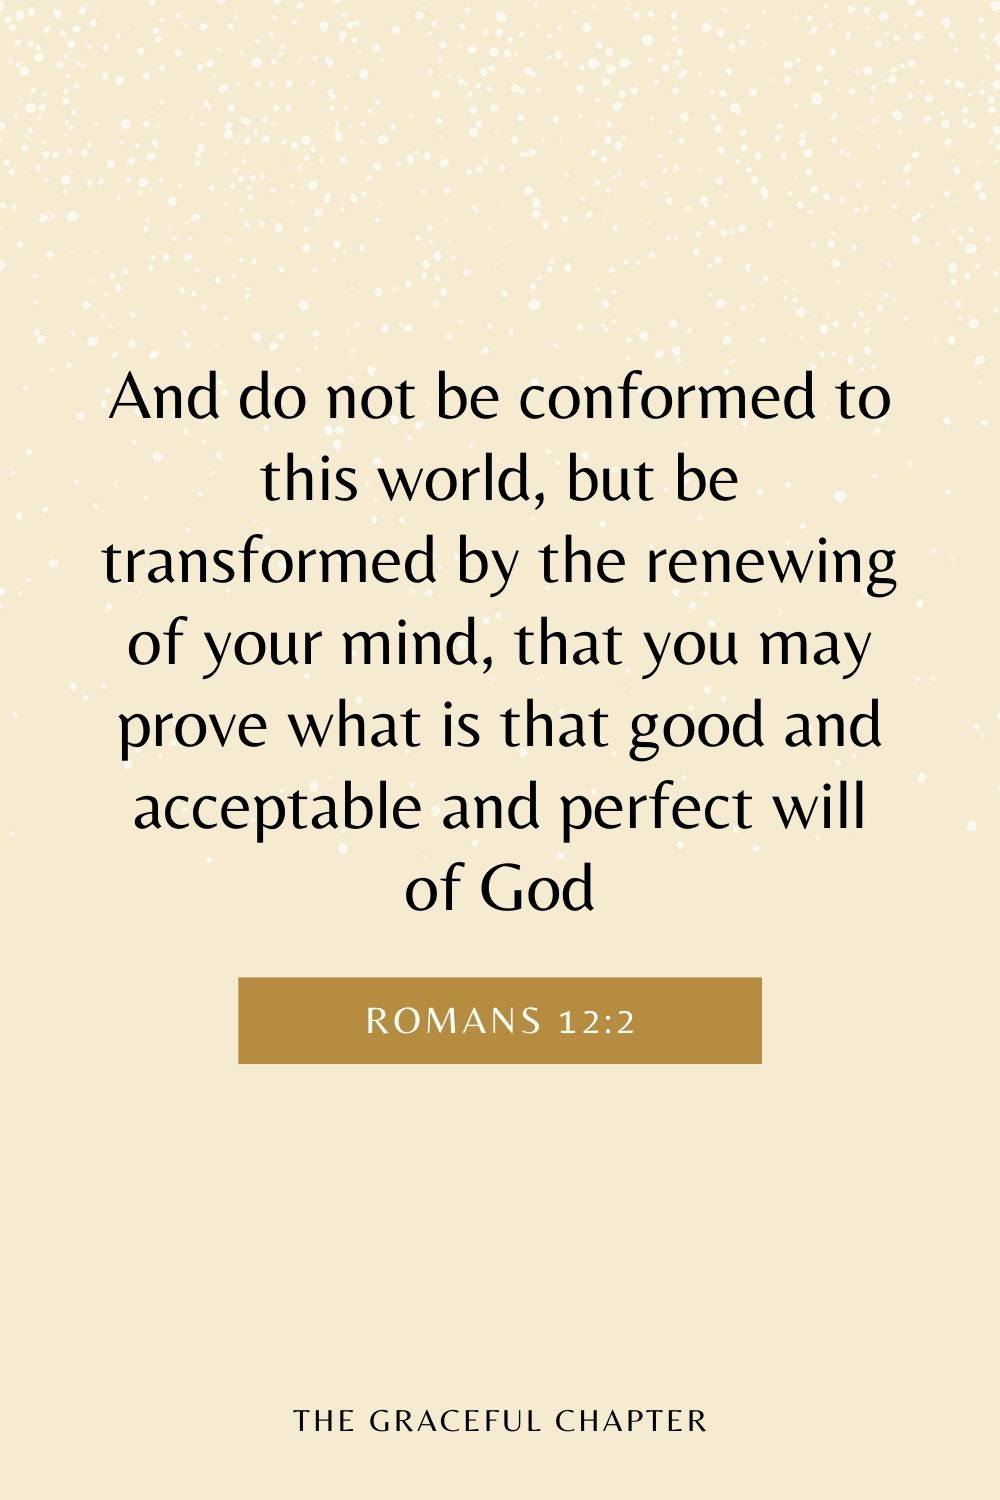 And do not be conformed to this world, but be transformed by the renewing of your mind, that you may prove what is that good and acceptable and perfect will of God Romans 12:2